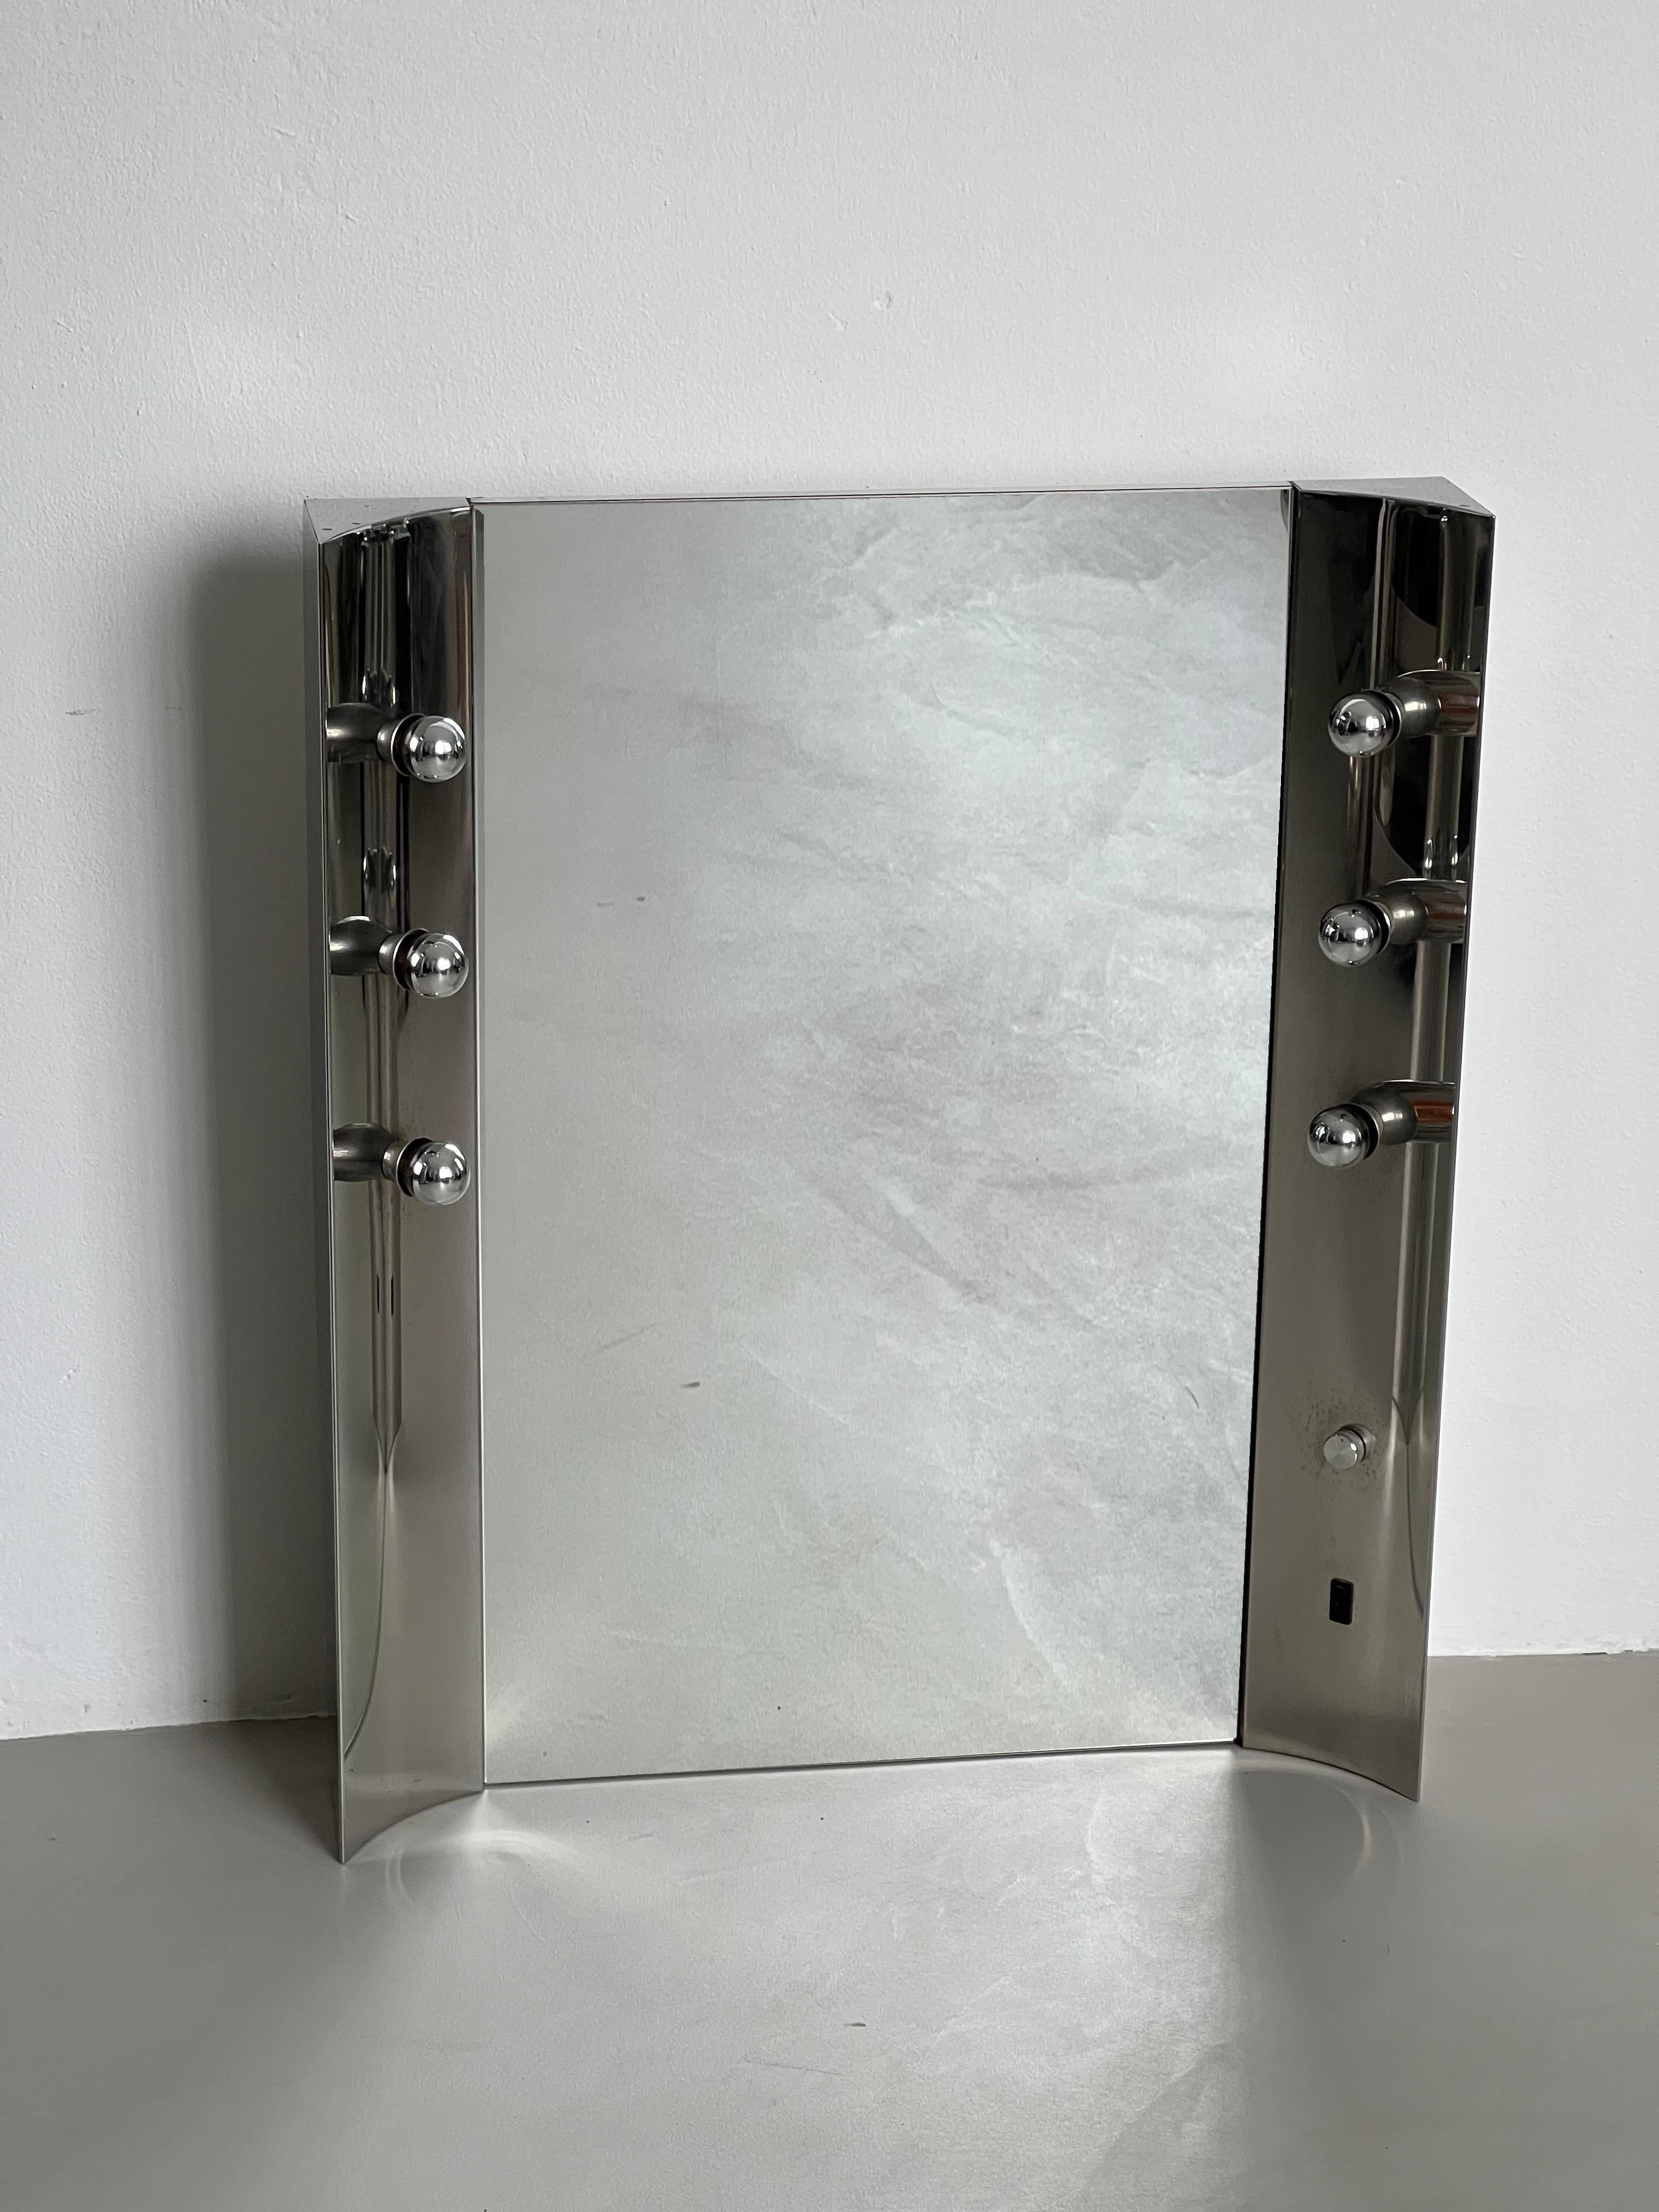 Offered for sale is a vintage Space Age vanity mirror, with six integrated light bulbs and a plug to connect a razor or hair dryer. The piece is big, and is suitable both for a bathroom and a powder/changing room. Its inward rounded sides make it